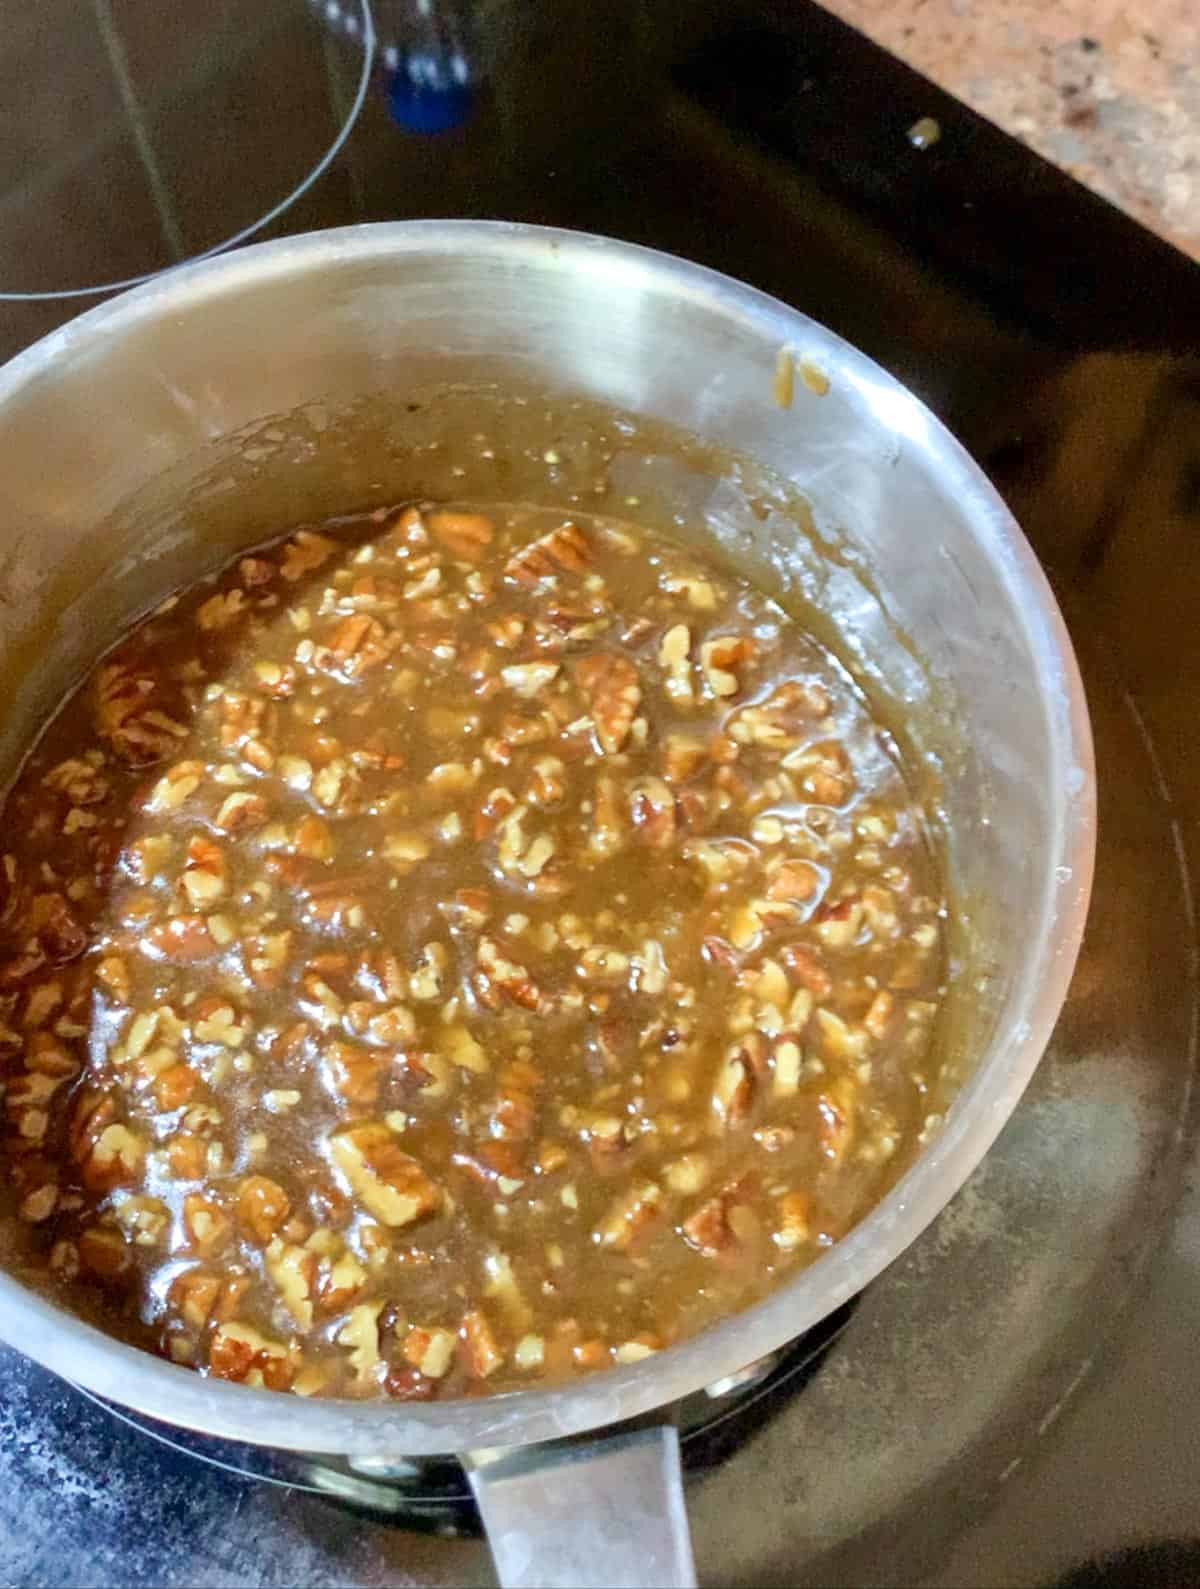 Done pecan icing in the saucepan on the stove.